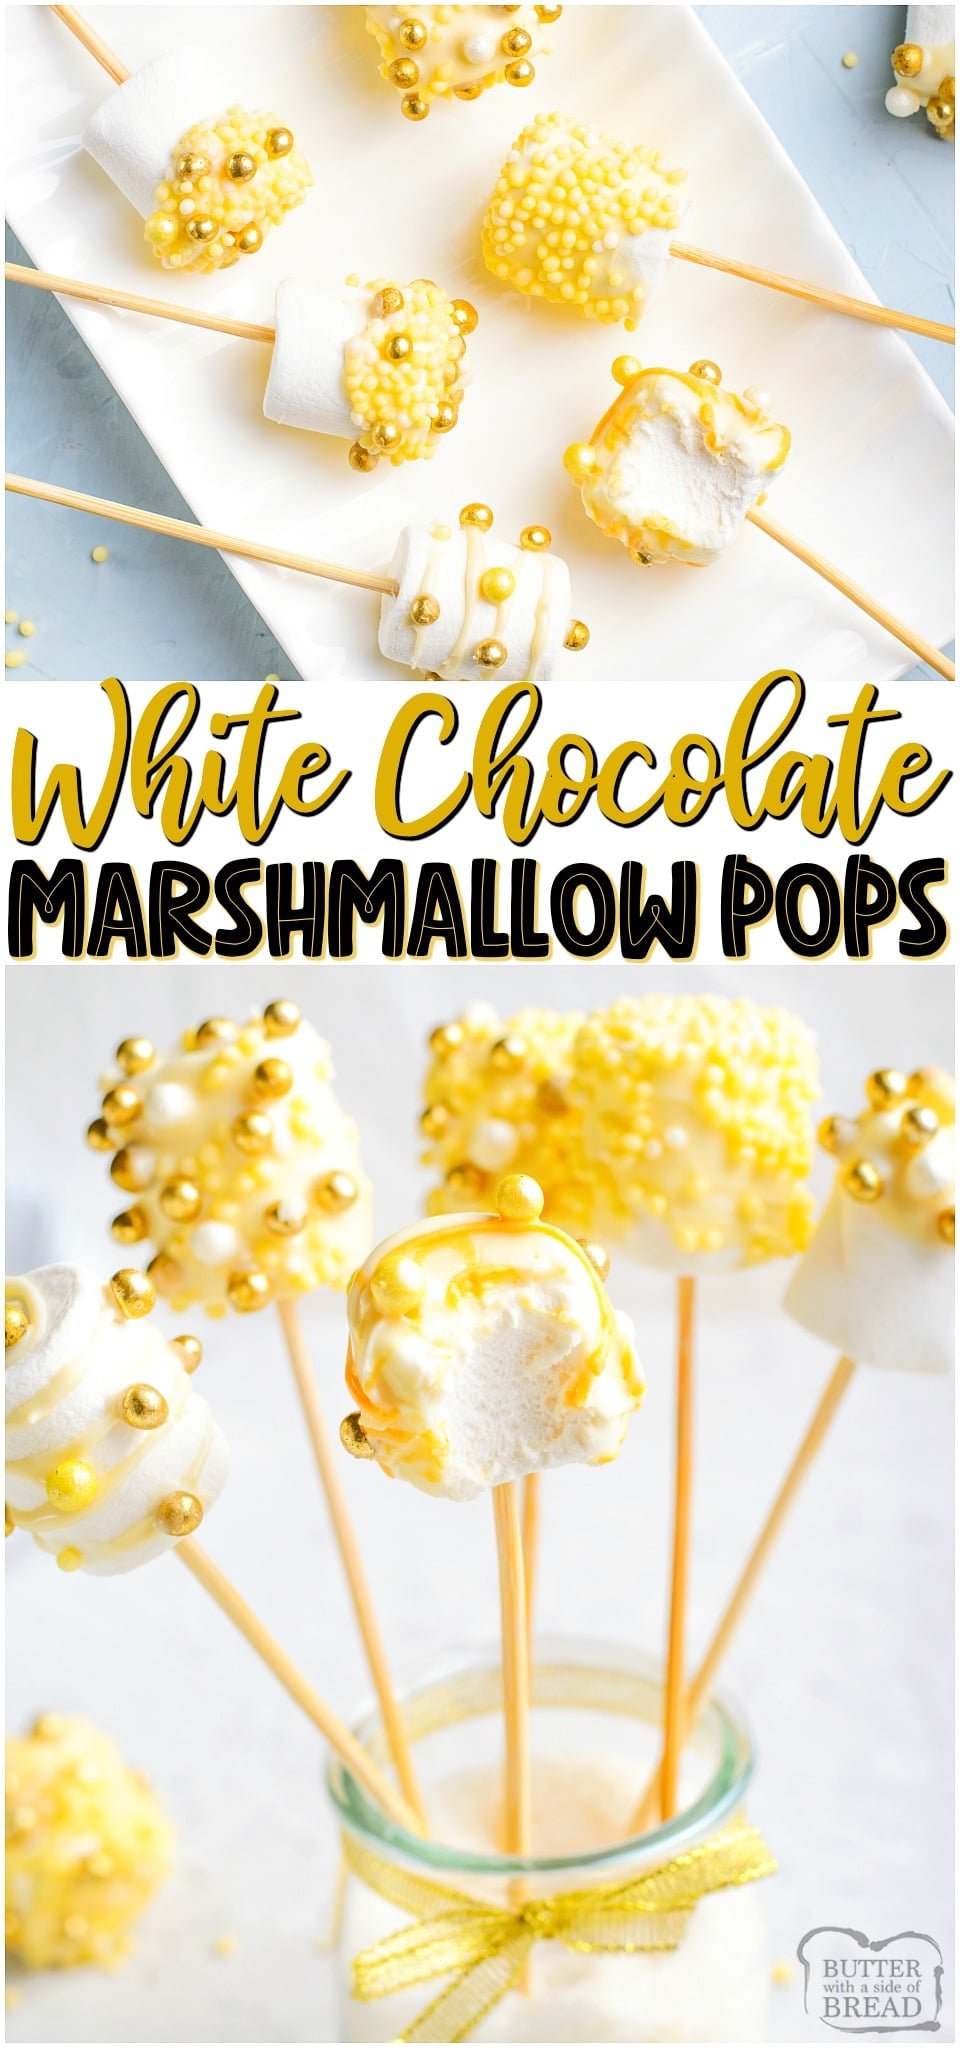 White Chocolate Covered Marshmallow Pops made with gold sprinkles for a simple, festive New Year's treat! Easy recipe for festive chocolate dipped marshmallows!